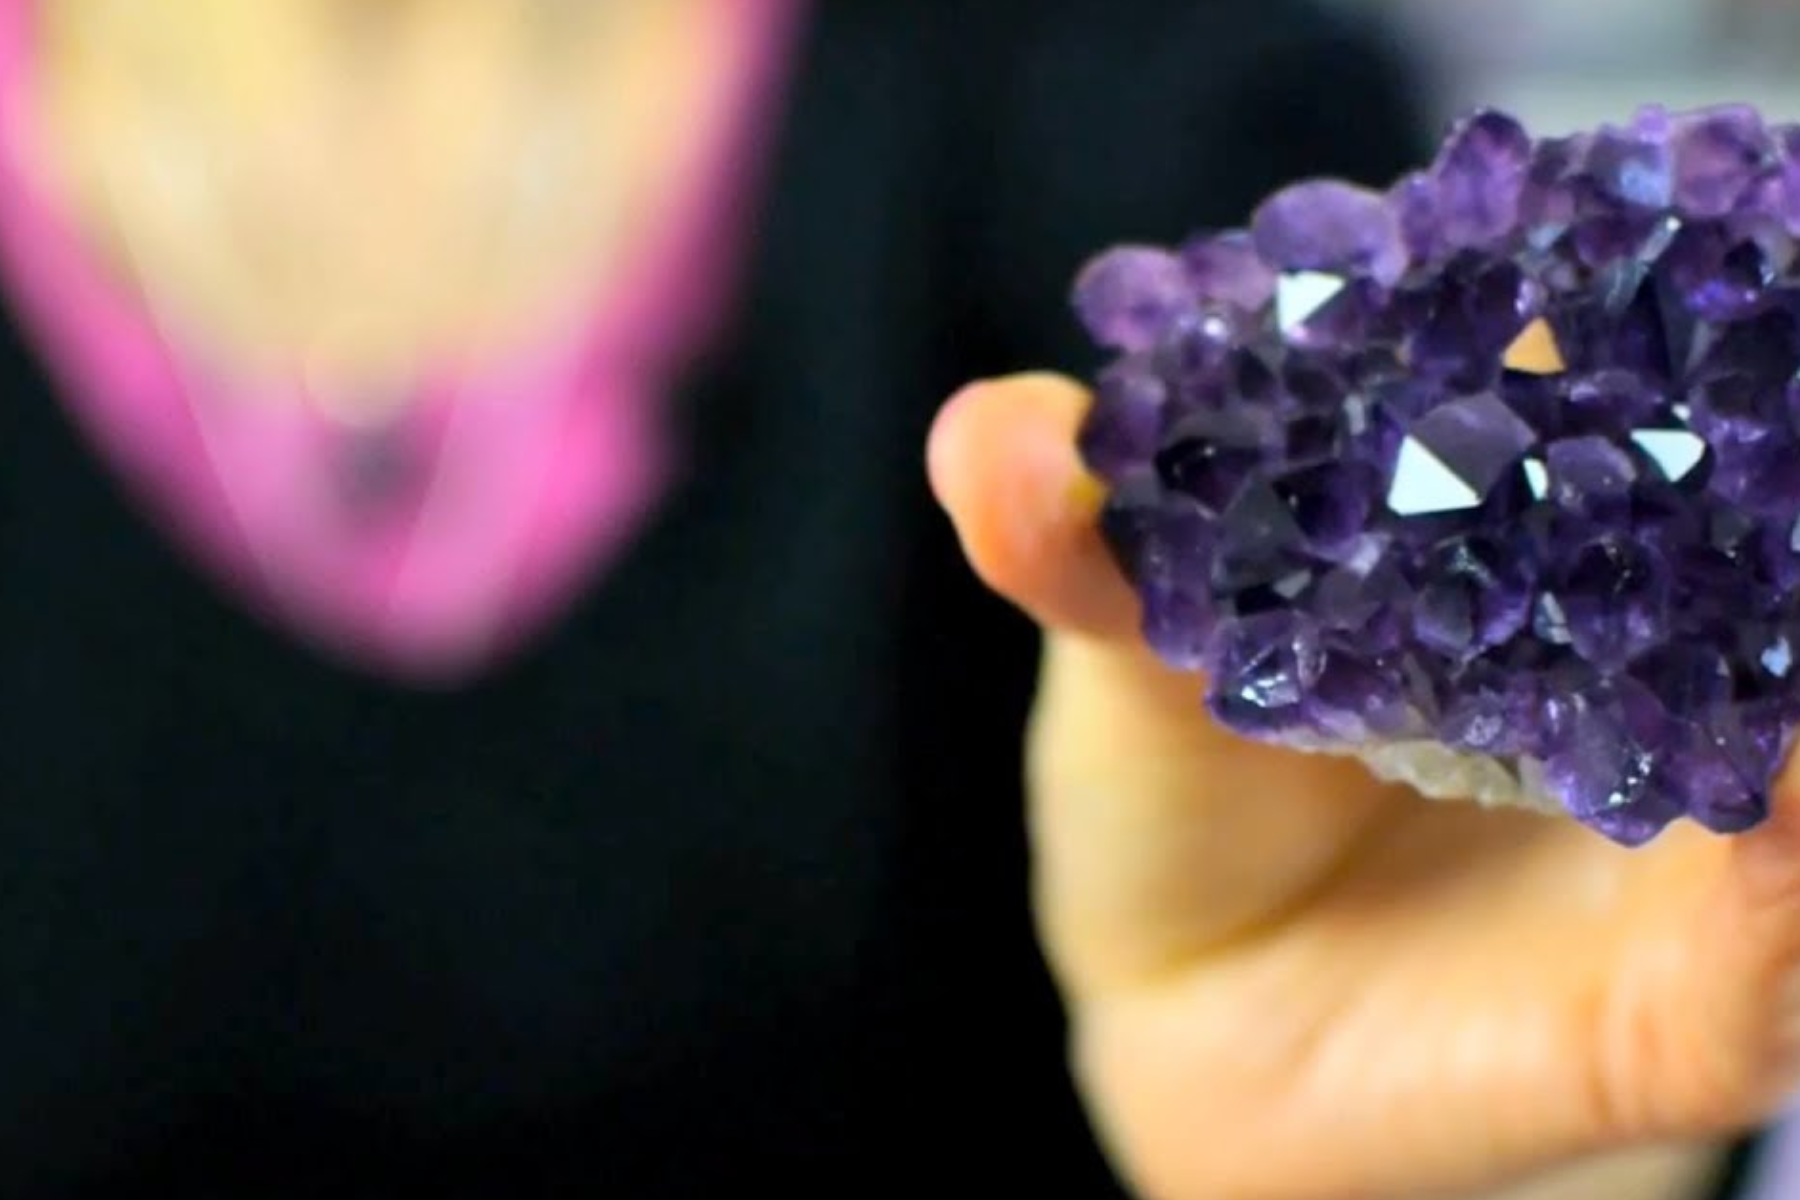 An image of a person holding an amethyst stone